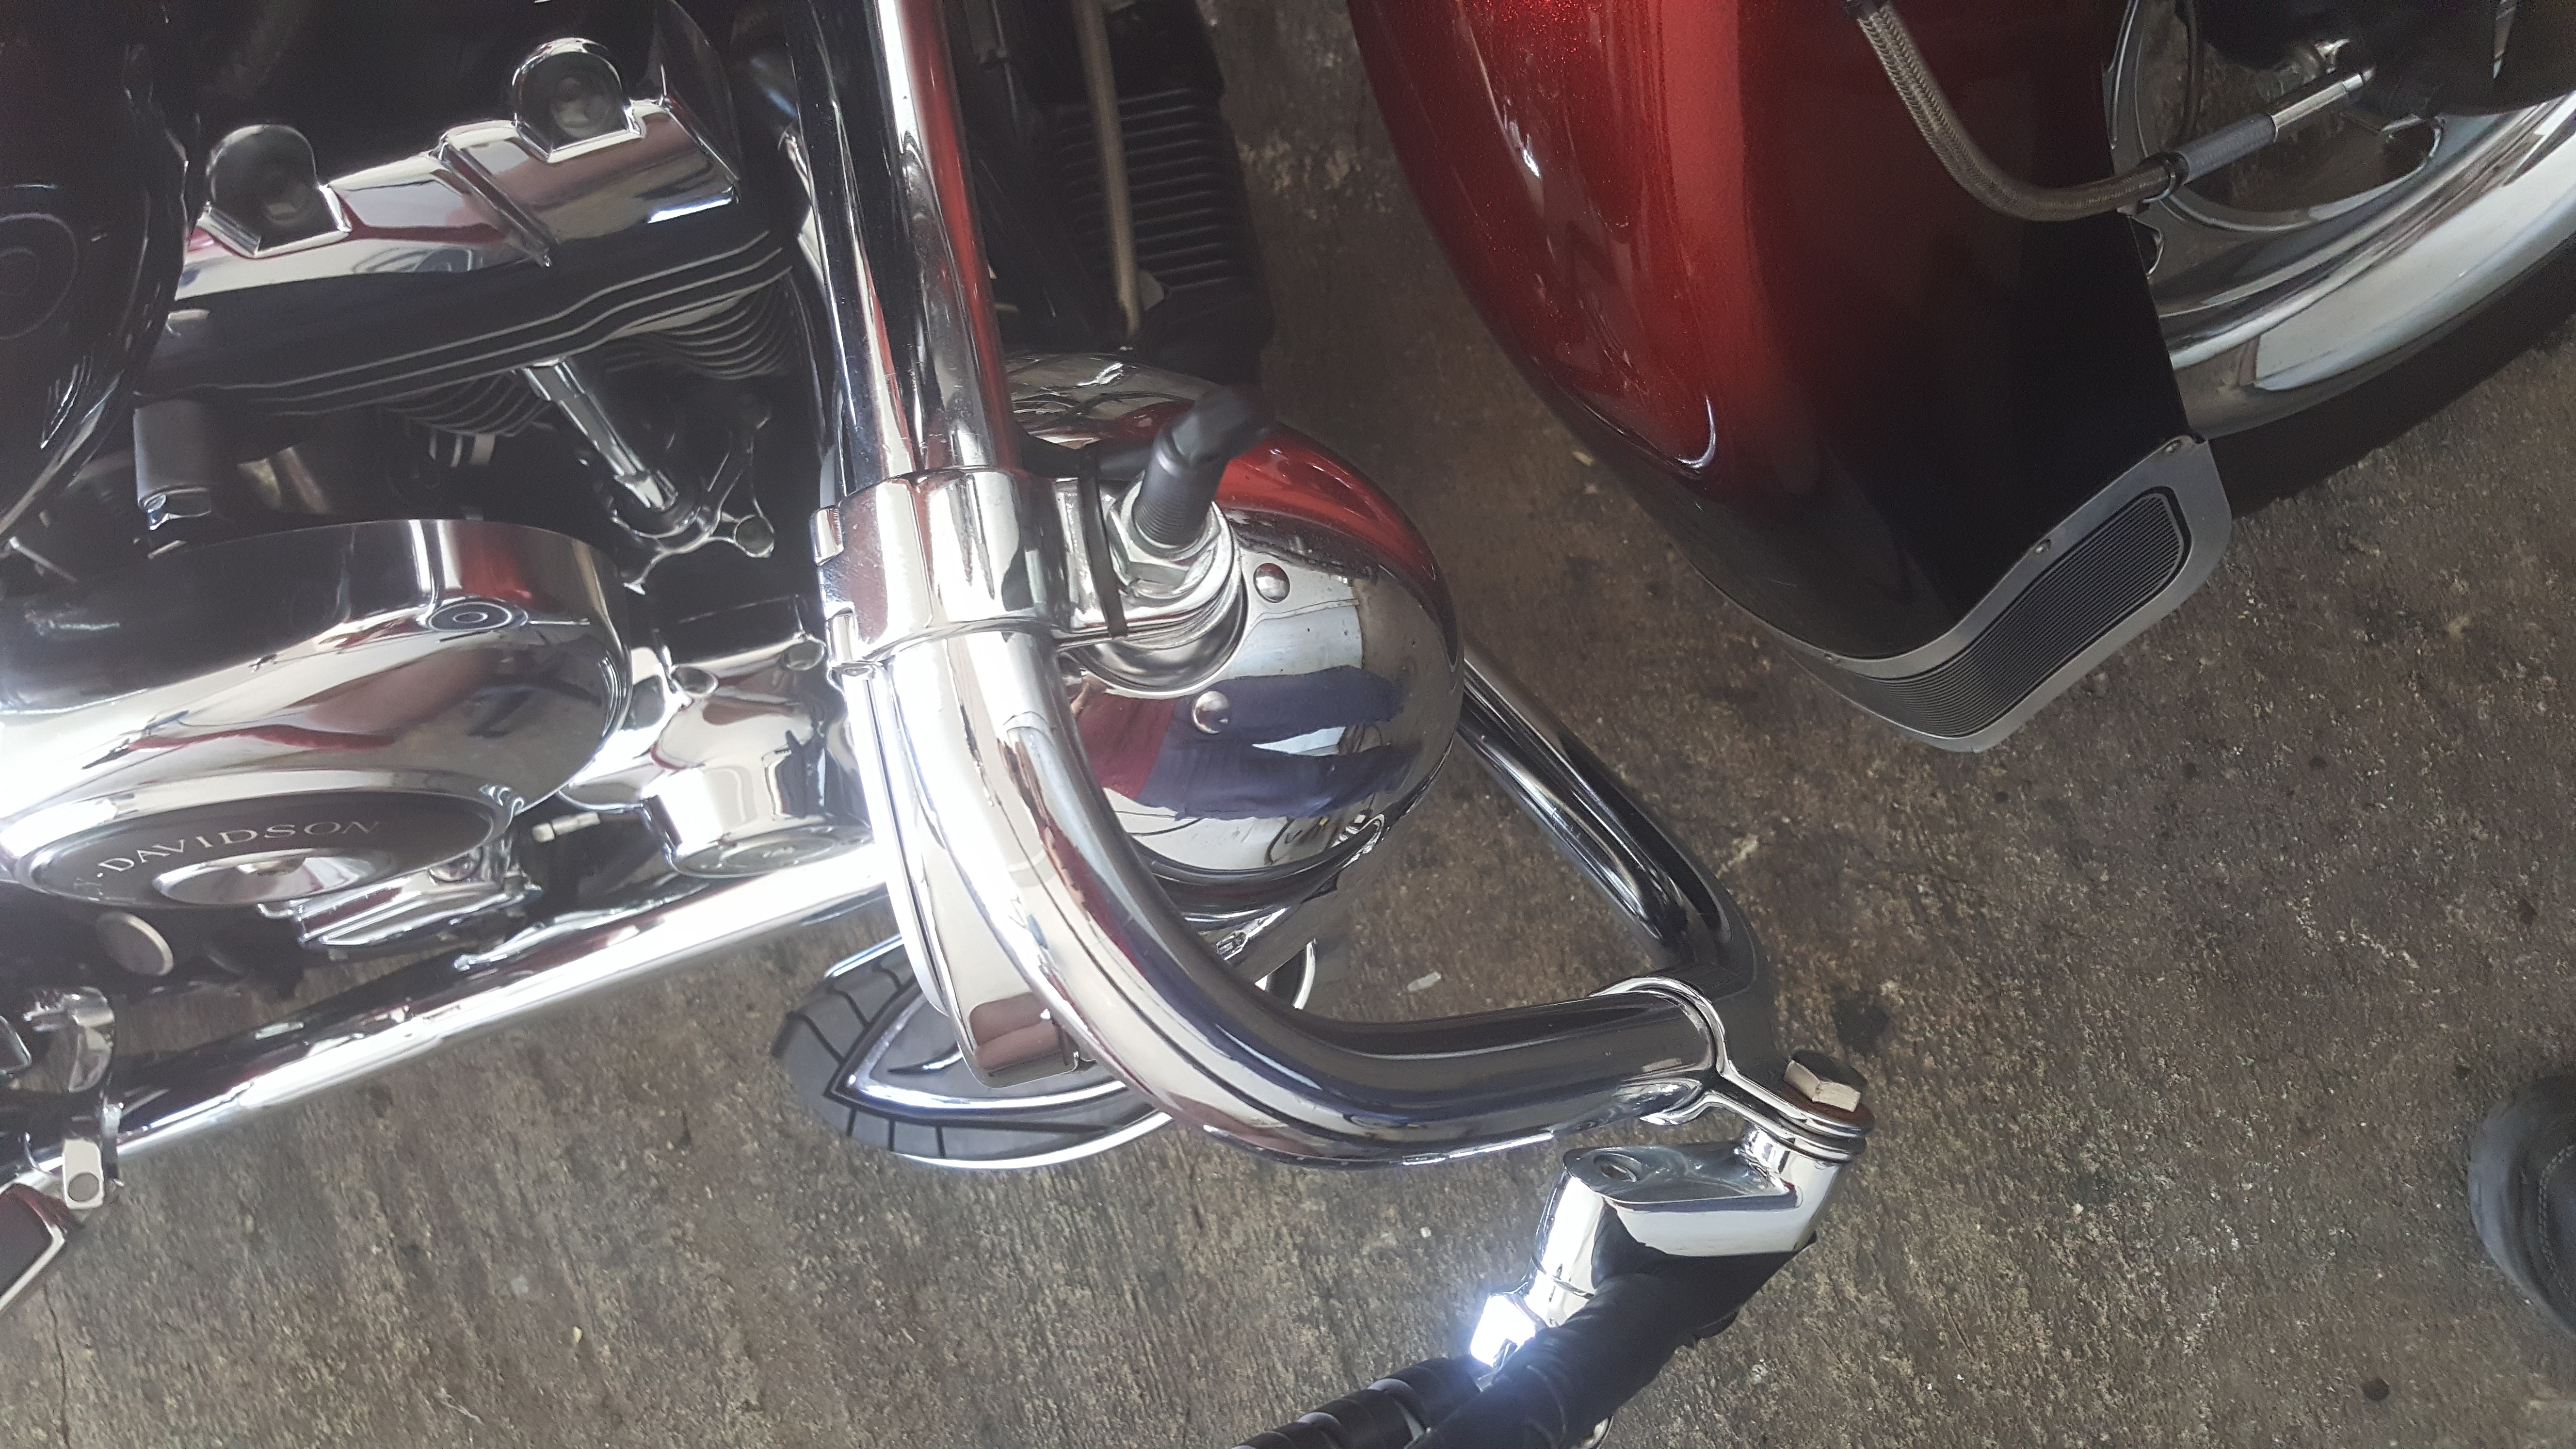 How To Fabricate Engine Guard Speakers Harley Davidson Forums